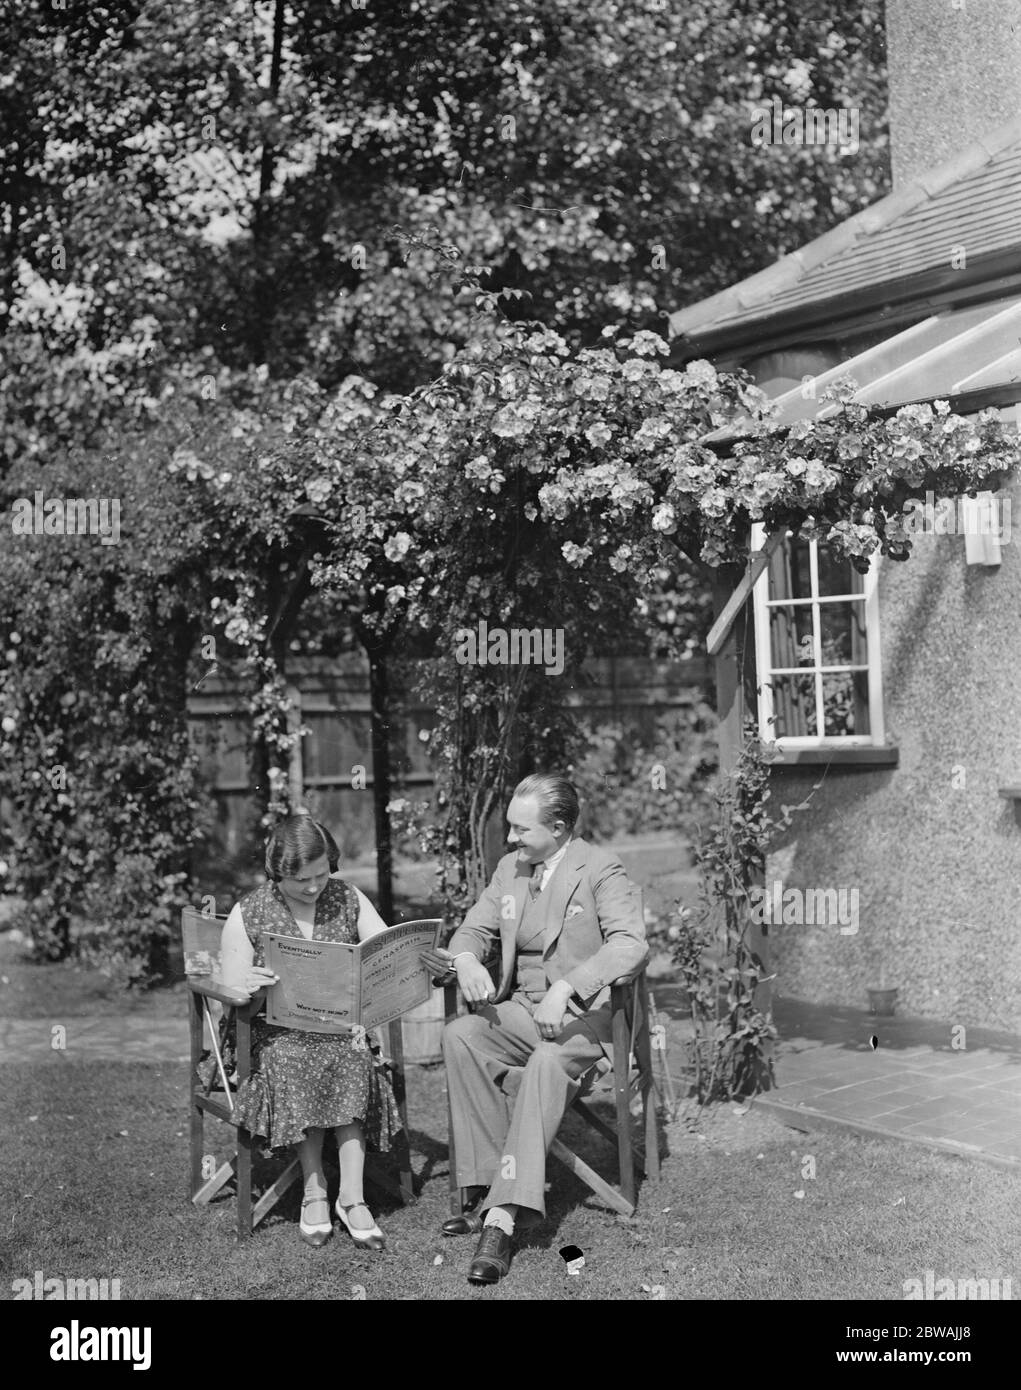 Mr and Mrs Robert Naylor at their home at Wembley . Mr Naylor it will be remembered took Mr Richard Tauber 's part at short notice at Drury Lane . 6 July 1931 Robert Naylor - 1899-1968; British ( Yorkshire ) tenor who sang Don Jose (Carmen) for Carl Rosa Opera Company, and gained overnight fame when he stood in for Richard Tauber in The Land of Smiles in 1931. For a decade he was a major star of opera, radio and variety, and made many recordings Stock Photo